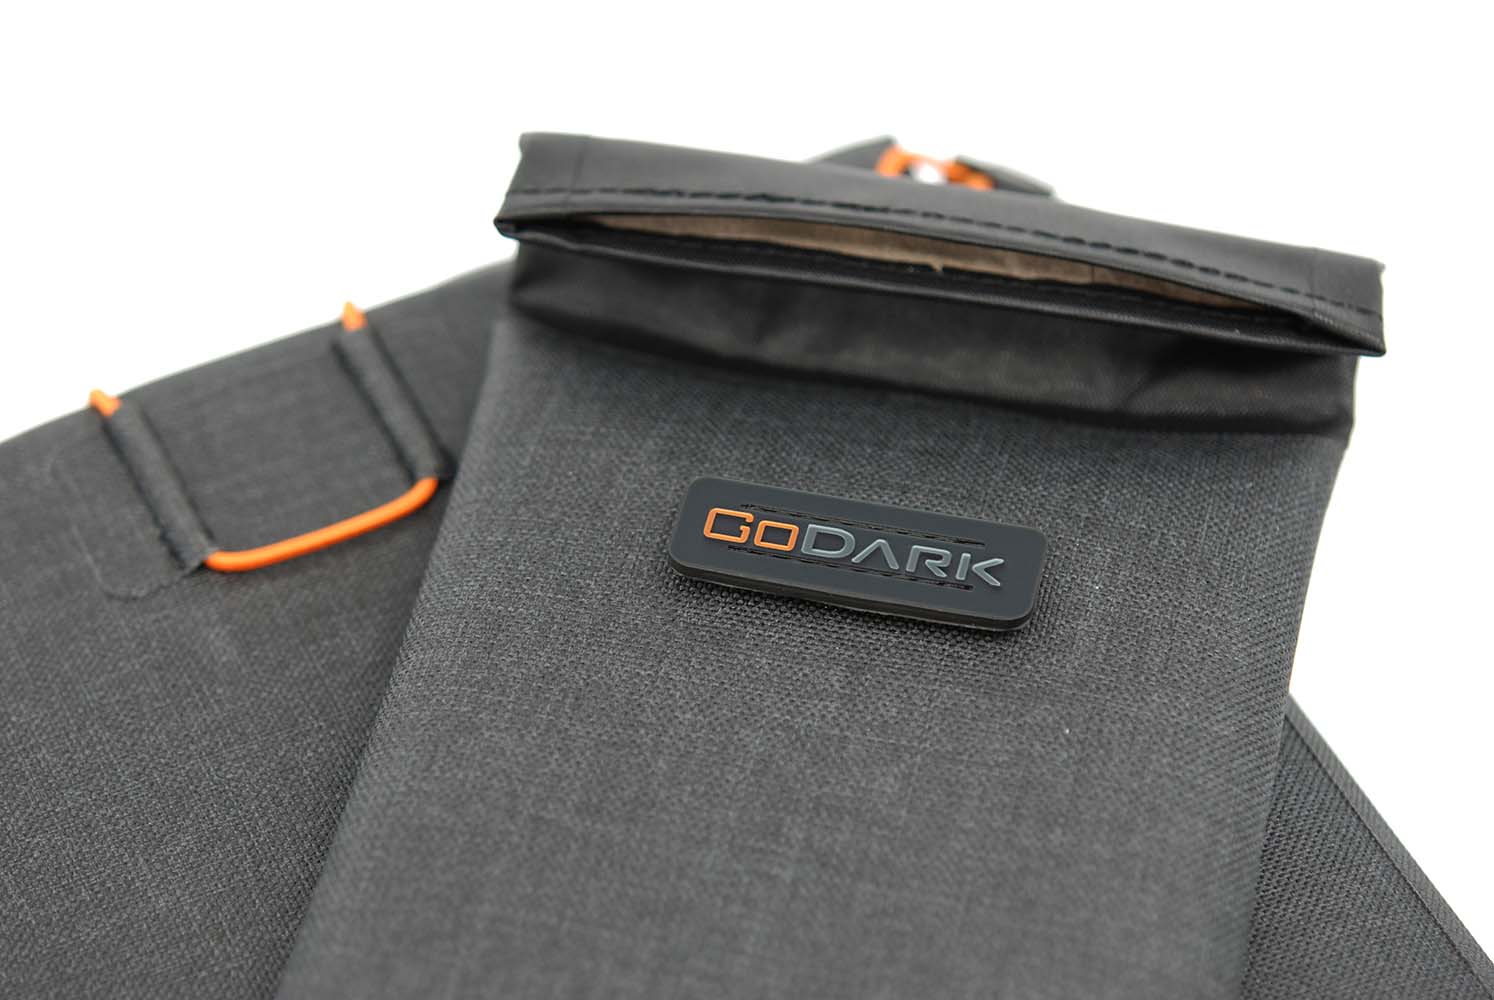 GoDark® Faraday Bags - Stop Cell Phone Tracking & Block EMF Signals to -  Tarriss